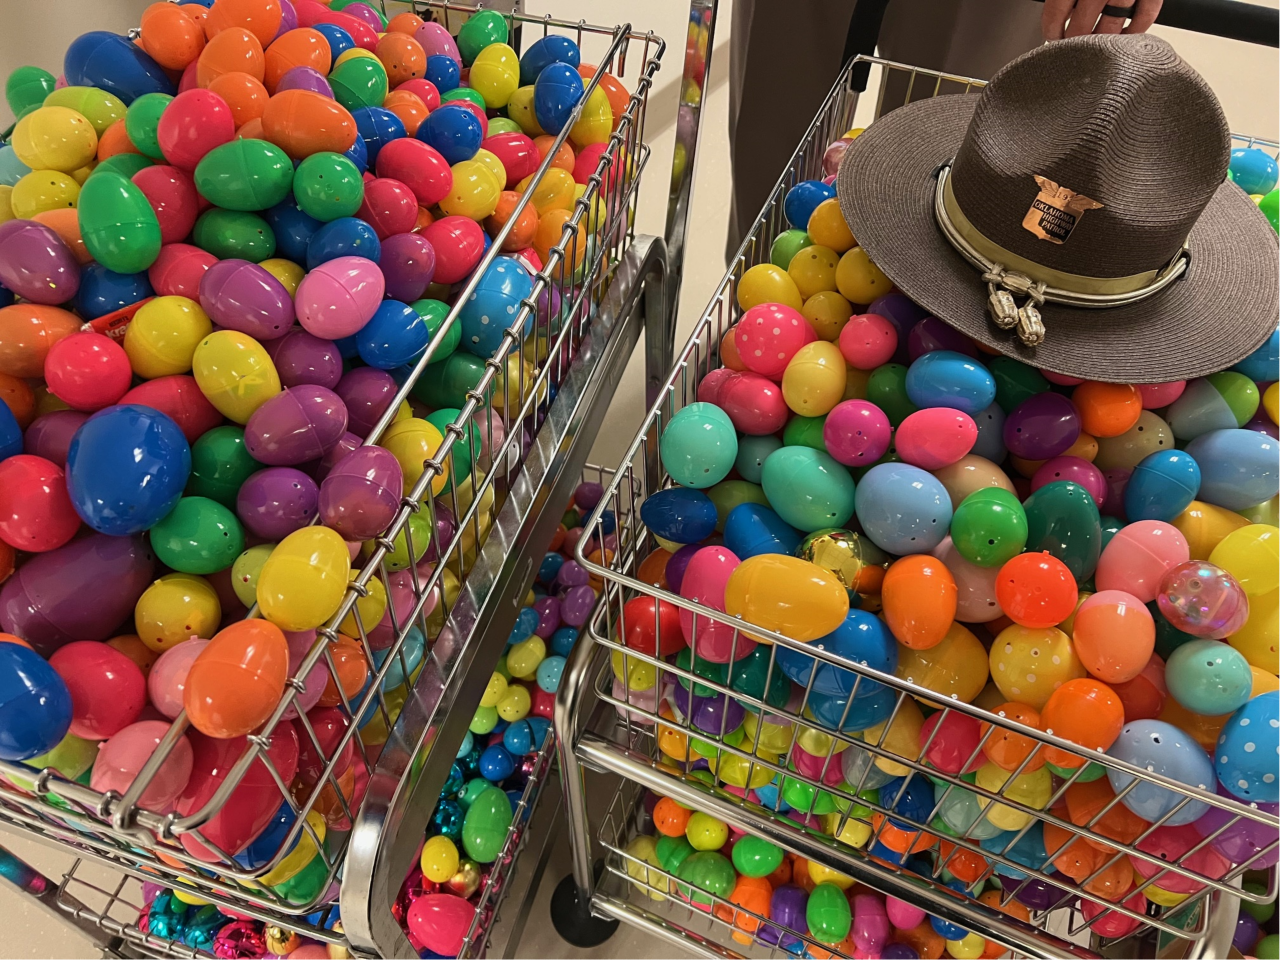 Two shopping carts filled with Easter eggs.